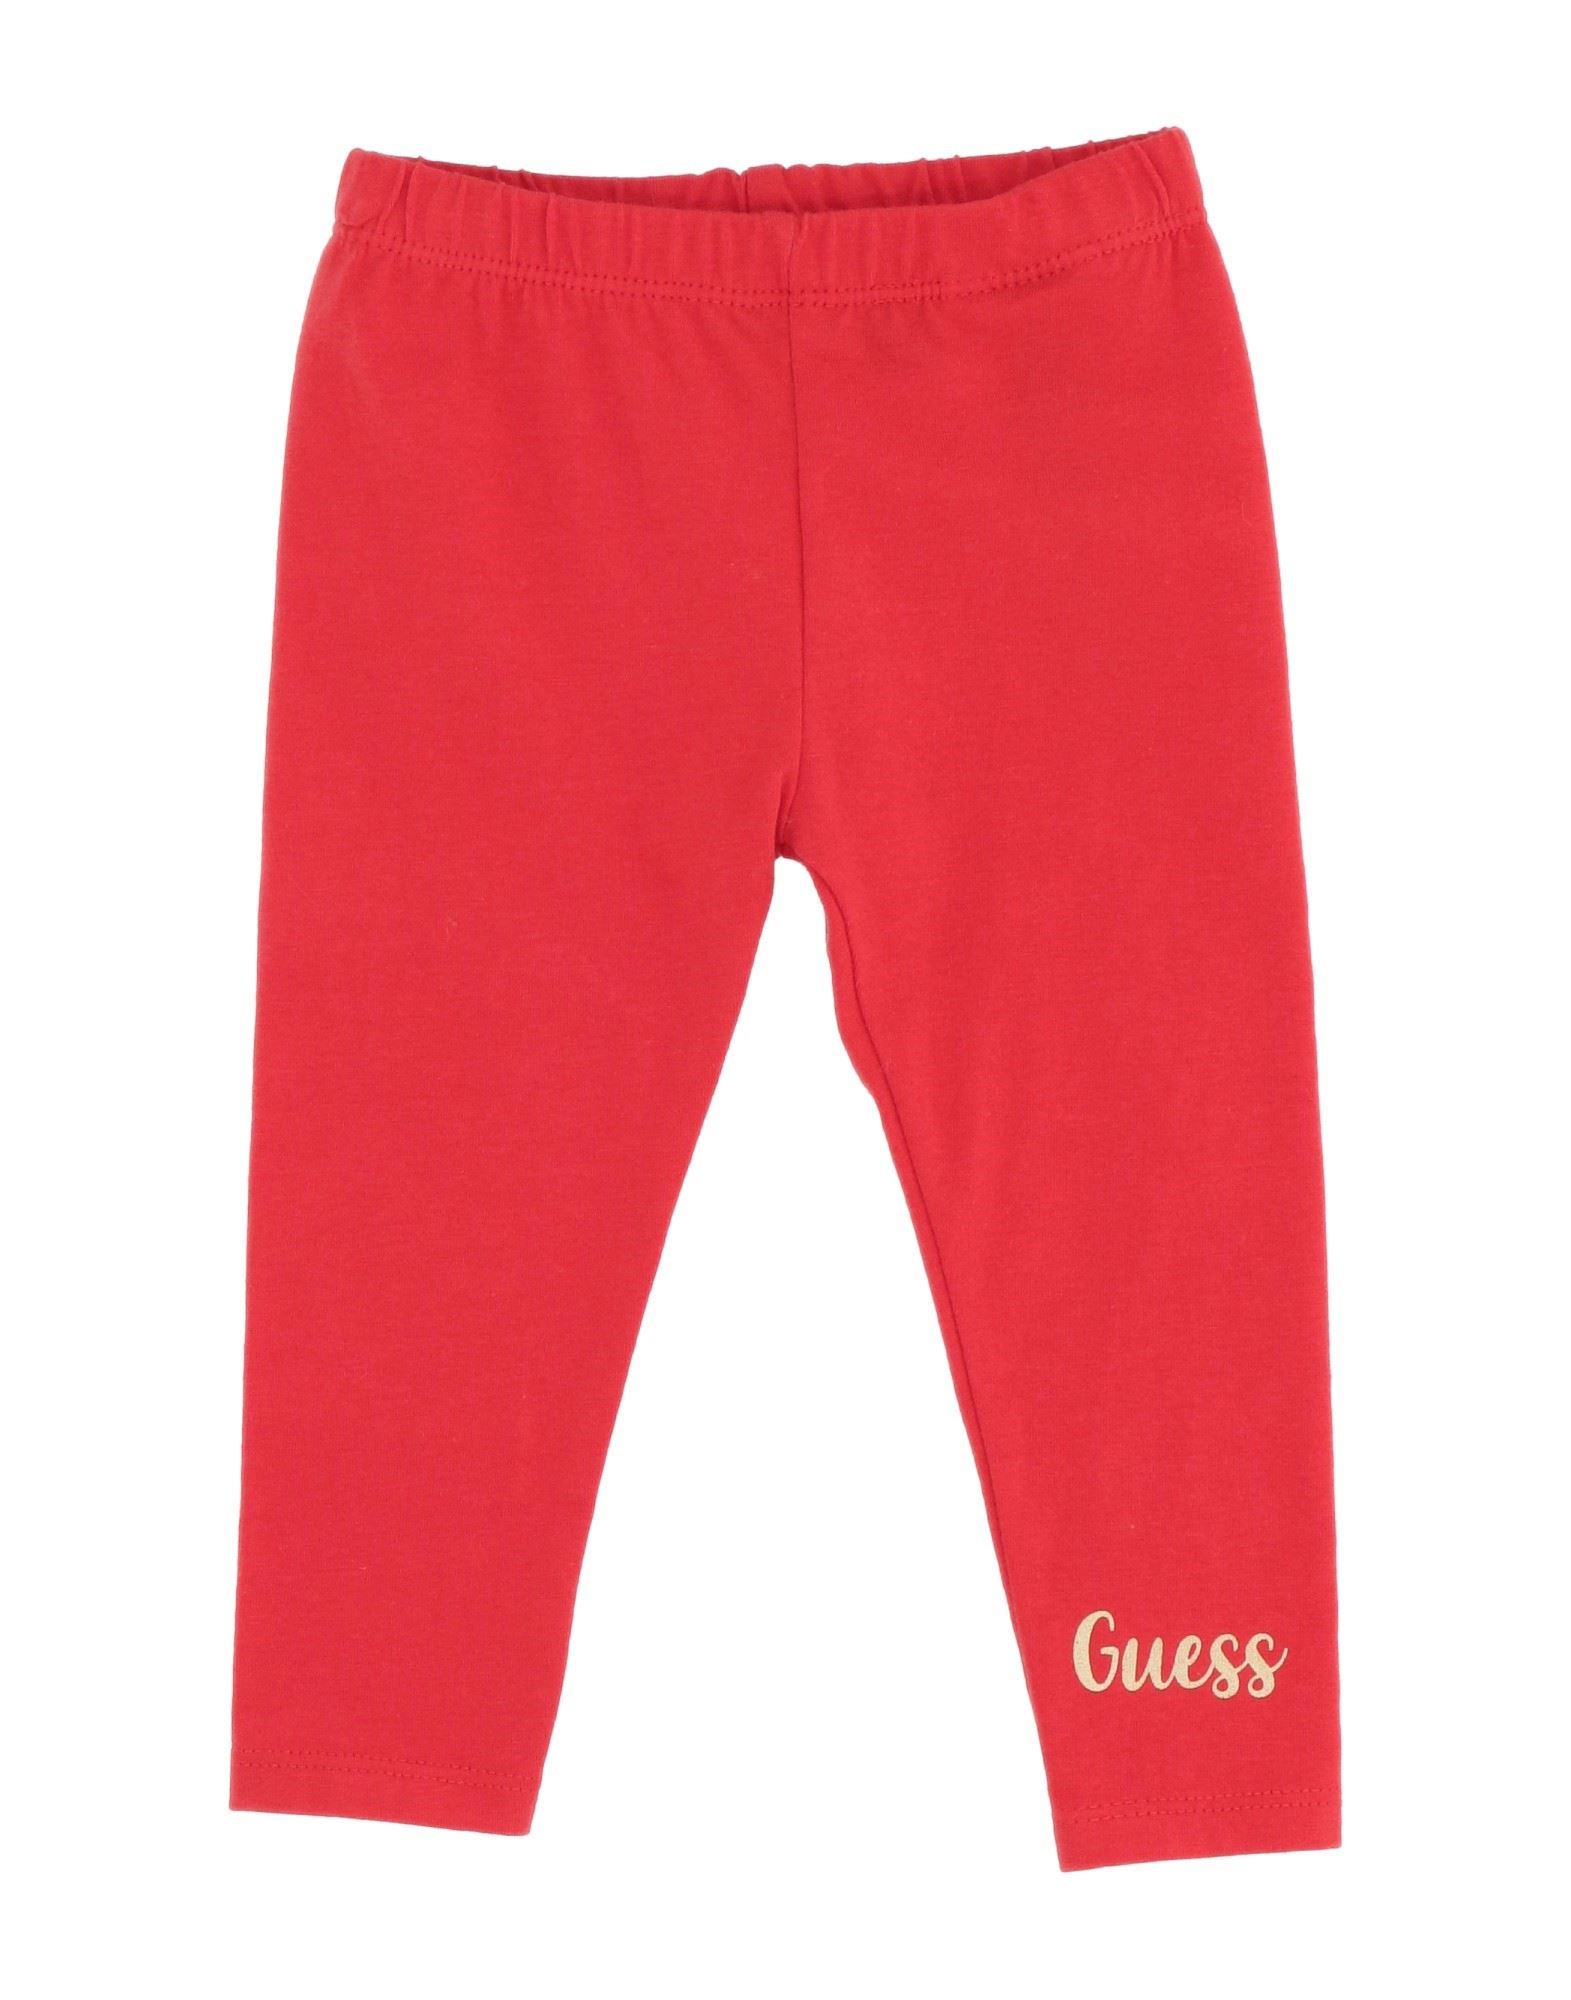 GUESS Leggings Kinder Rot von GUESS